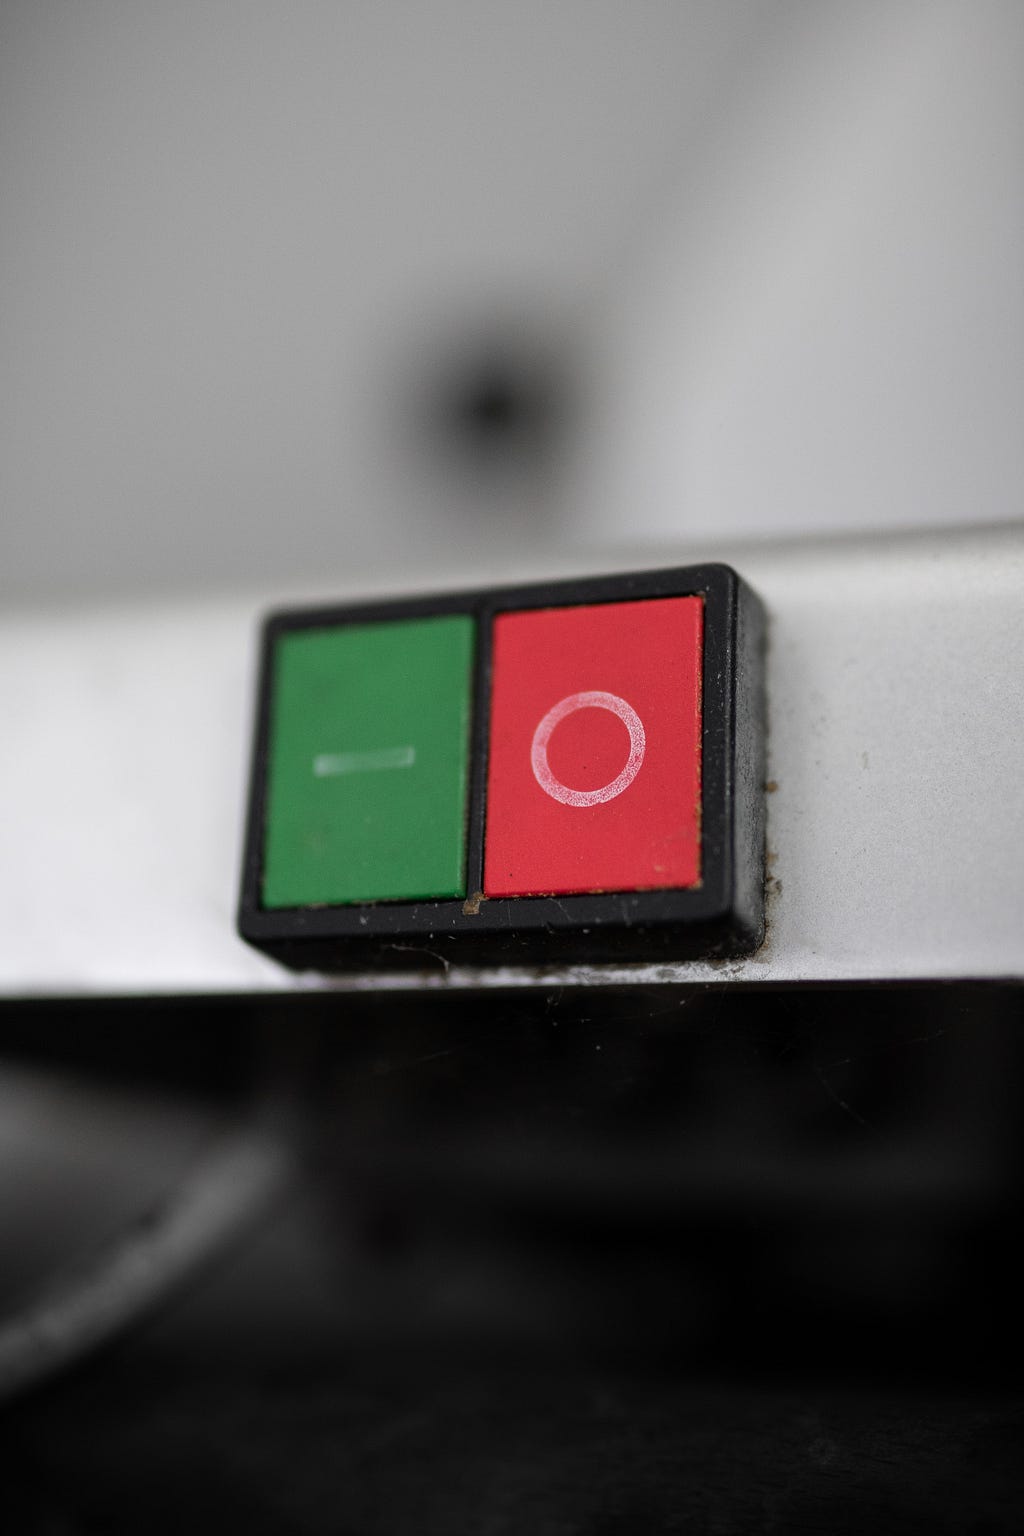 A green, well worn minus button is set to the left (from view) red circle image button. The display is for start/stop.